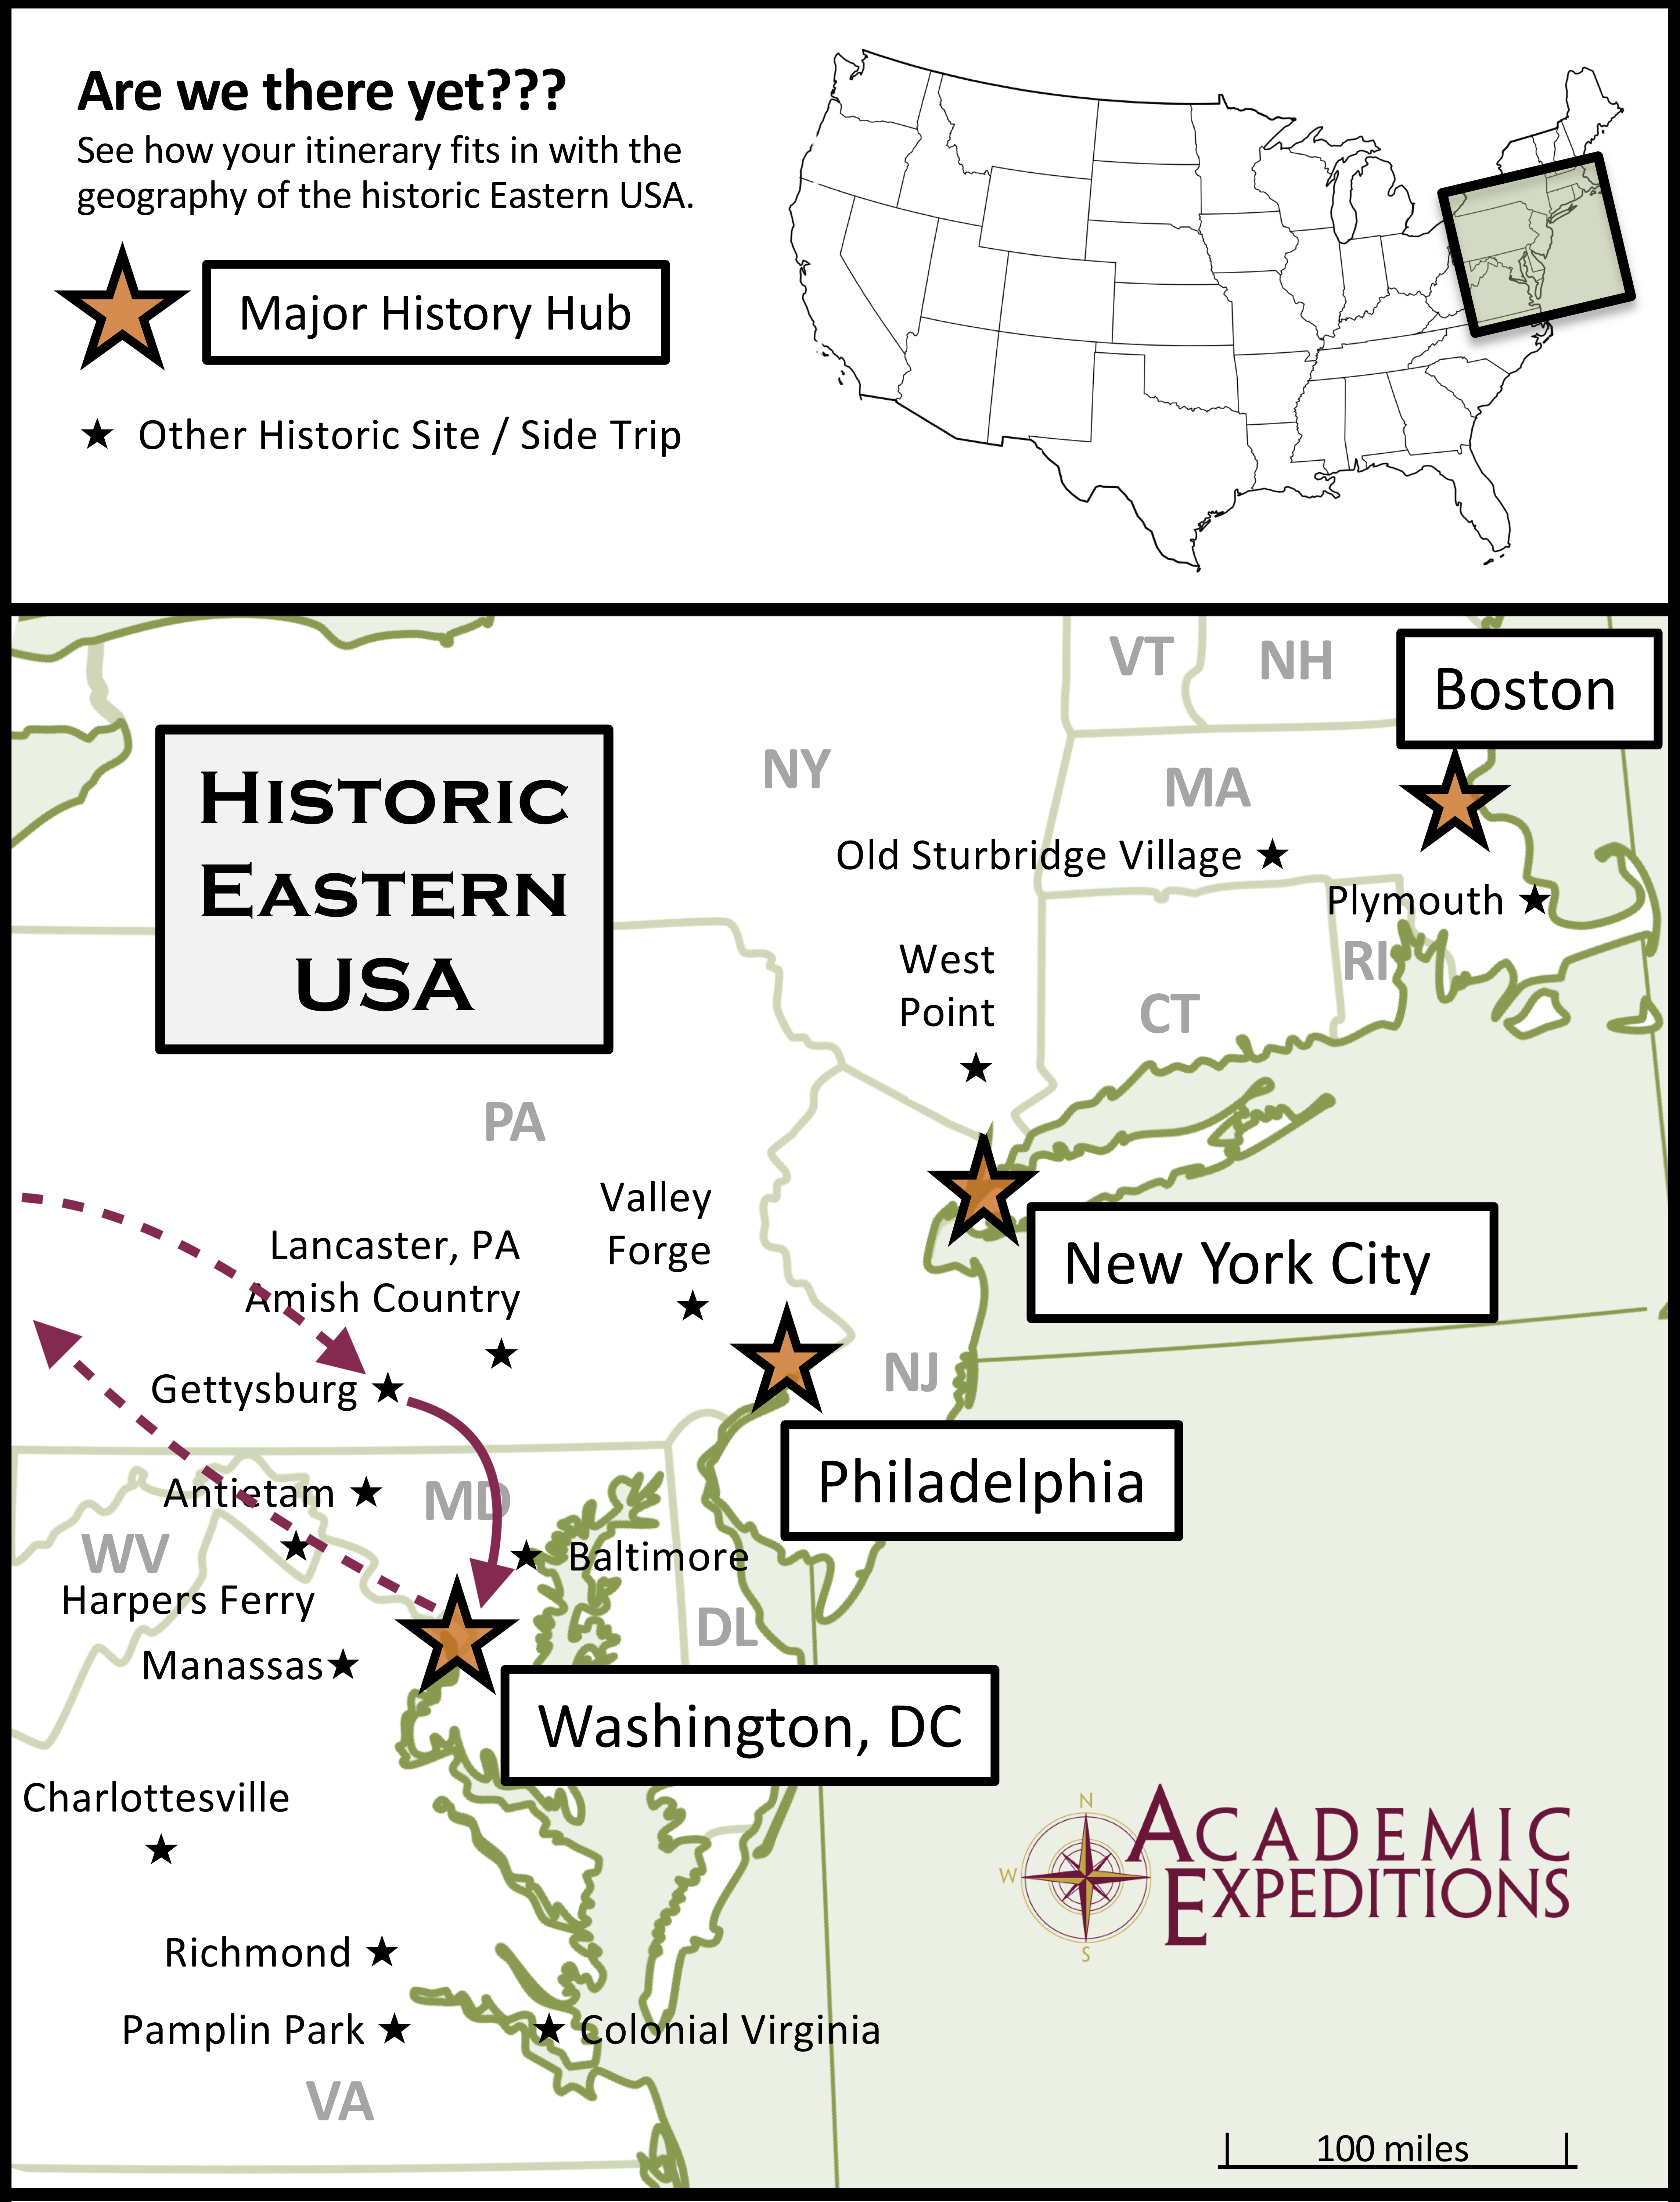 Map of the East Coast of the U.S. with points of interest marked by stars